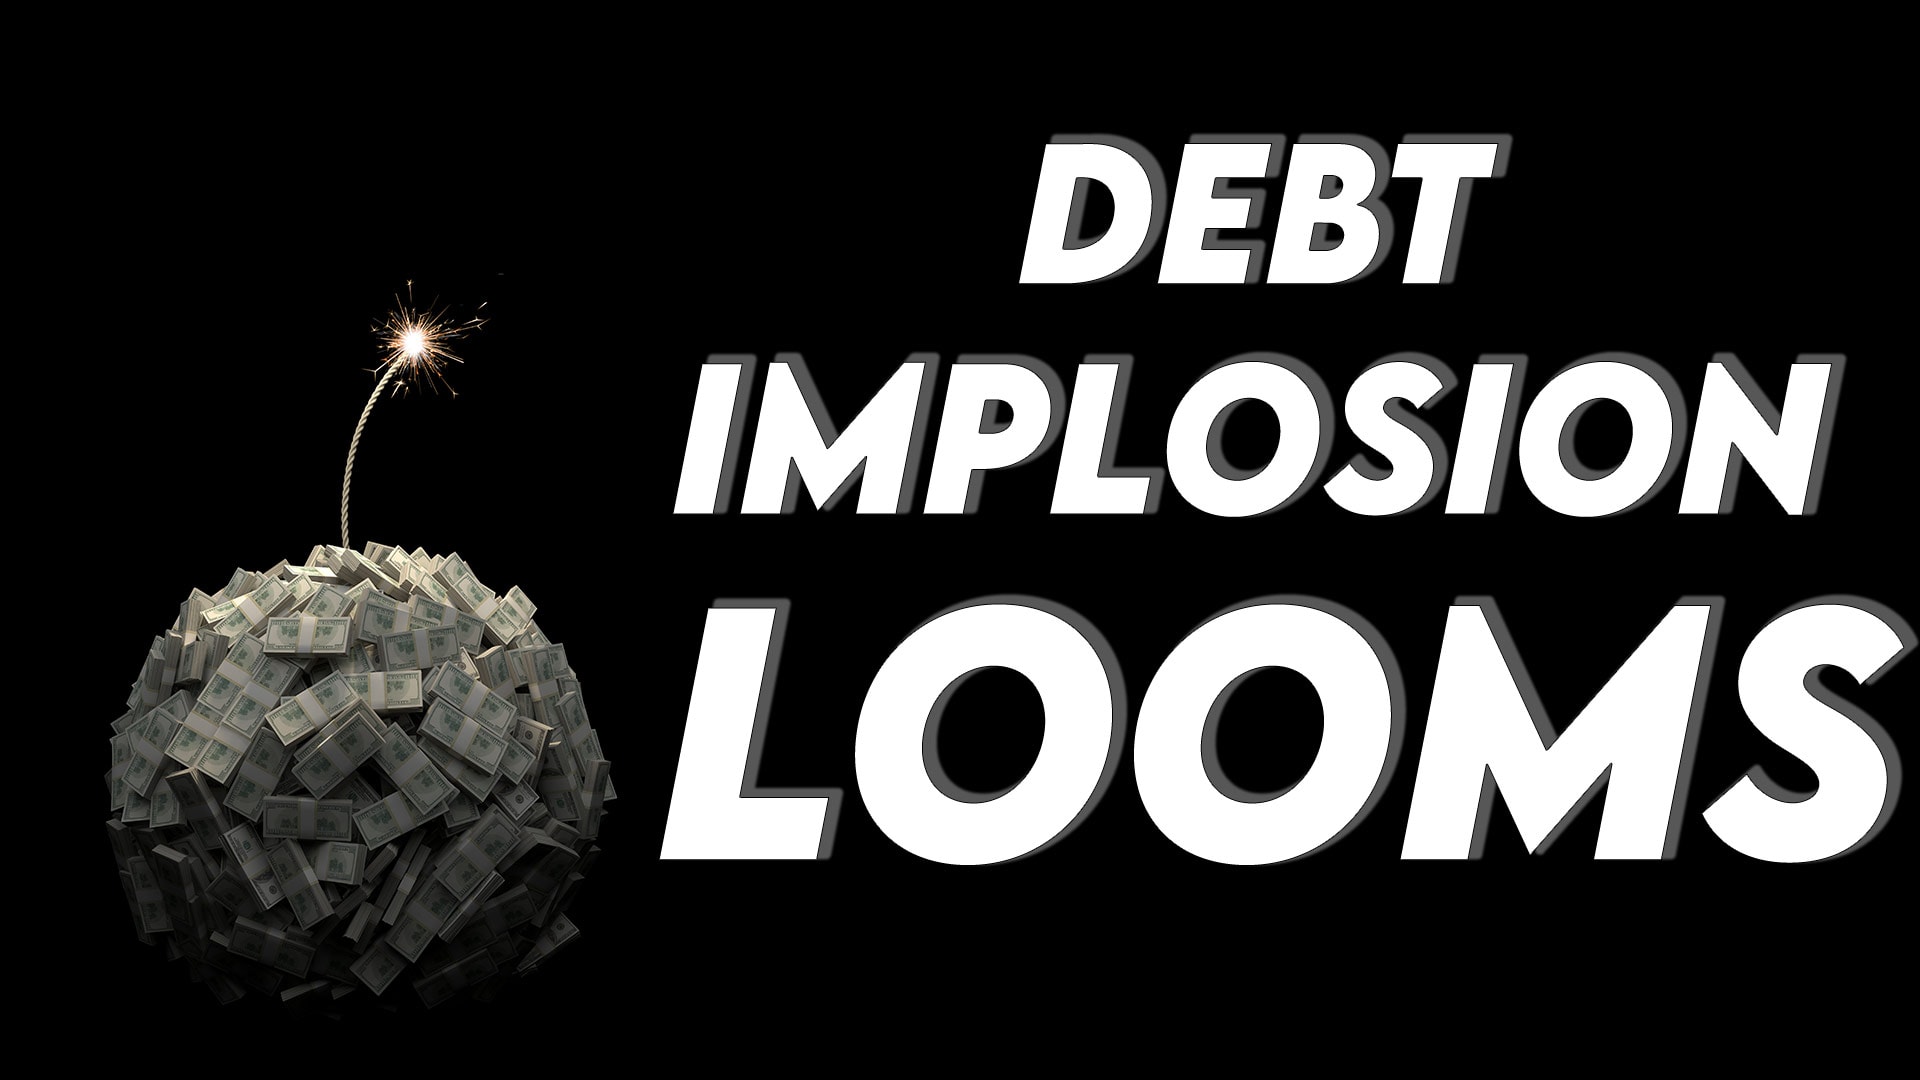 Why You Should Expect a Once-in-a-Lifetime Debt Crisis